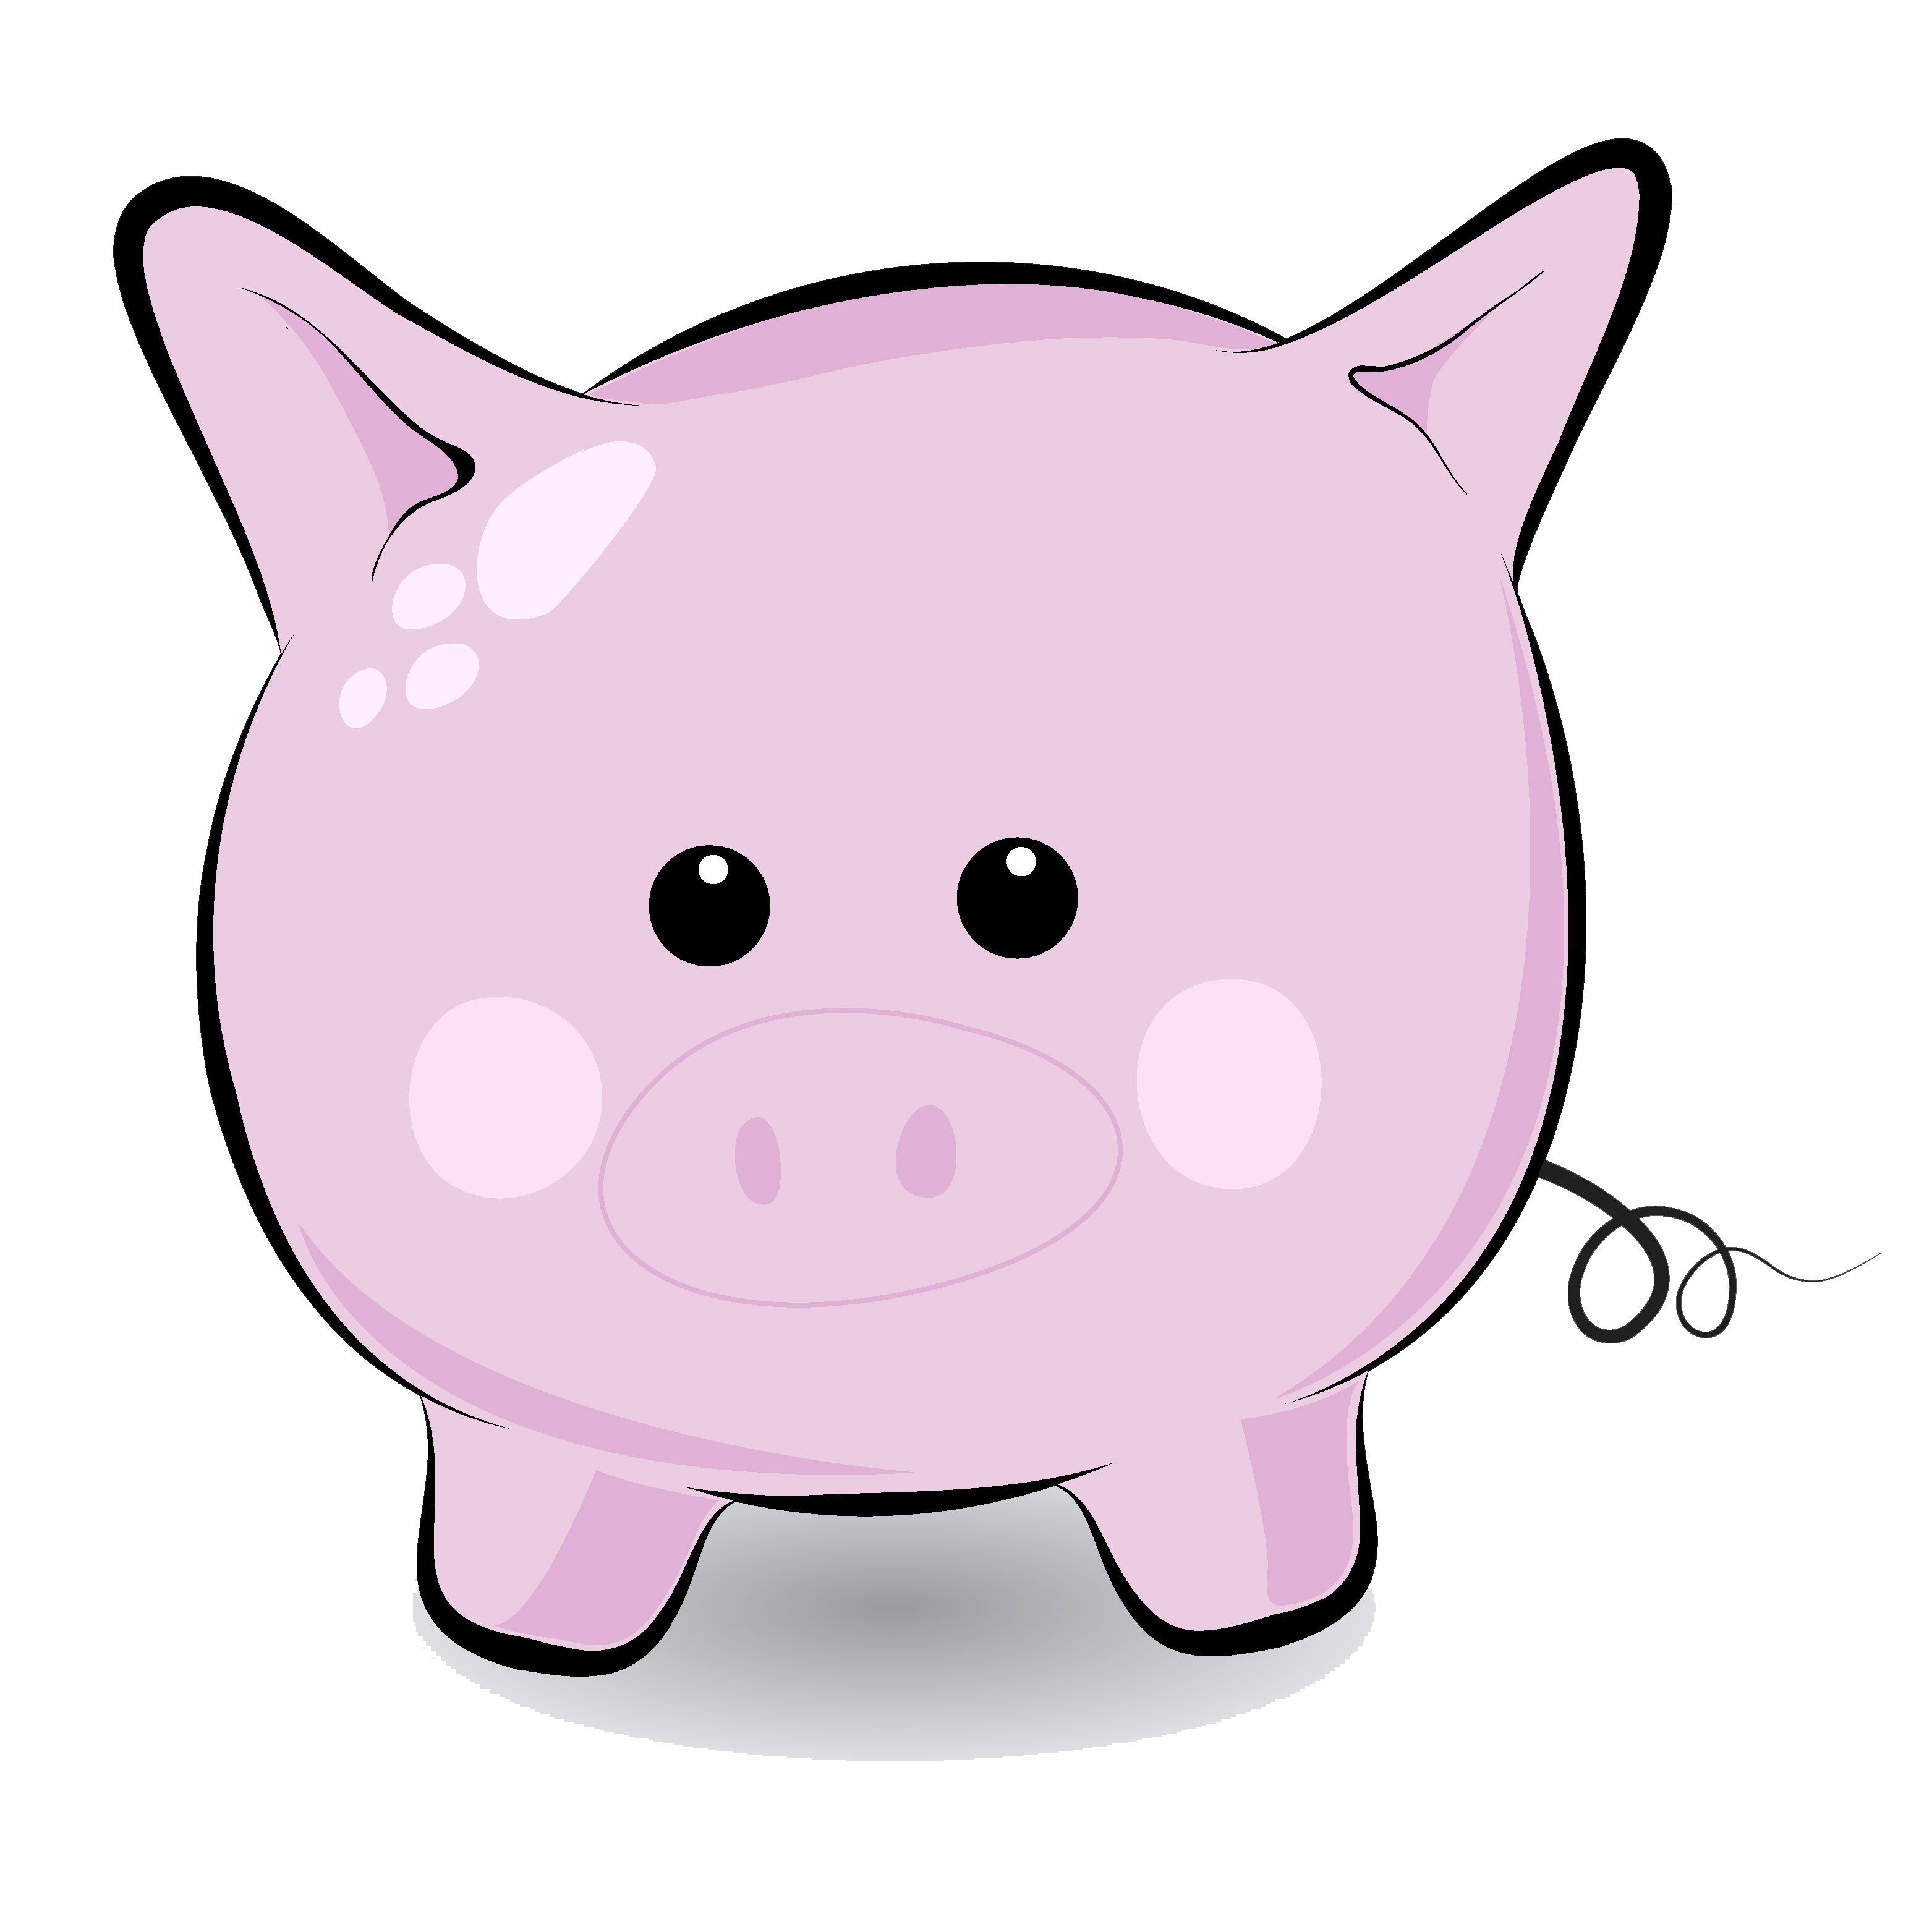 Free Cute Pig Pictures Cartoon, Download Free Clip Art, Free